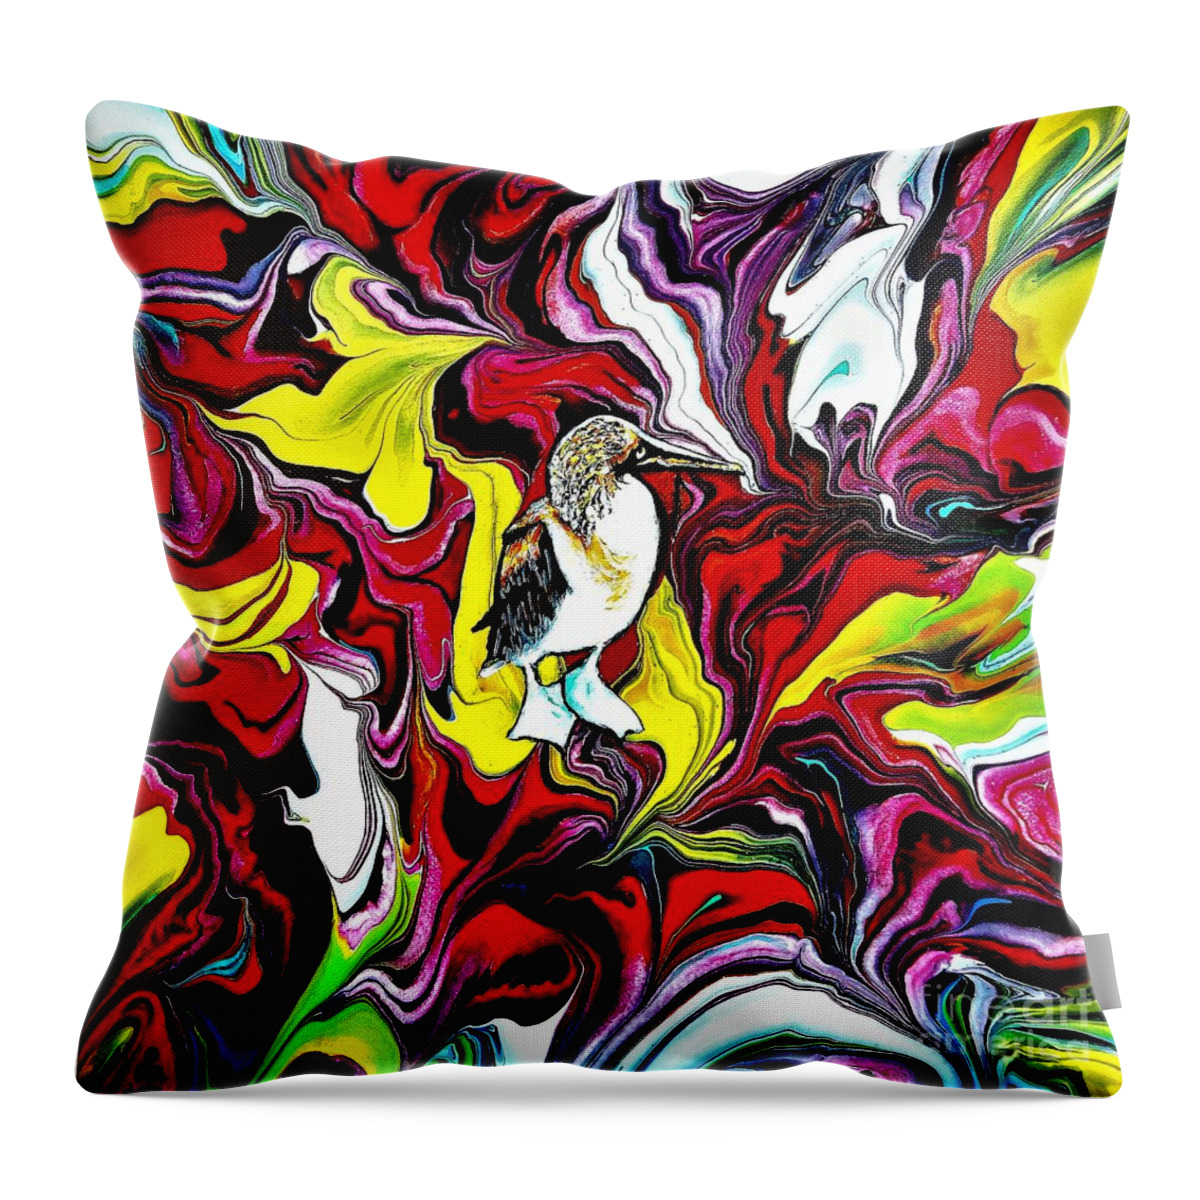 Abstract Throw Pillow featuring the painting Wonderland by Dmitri Ivnitski